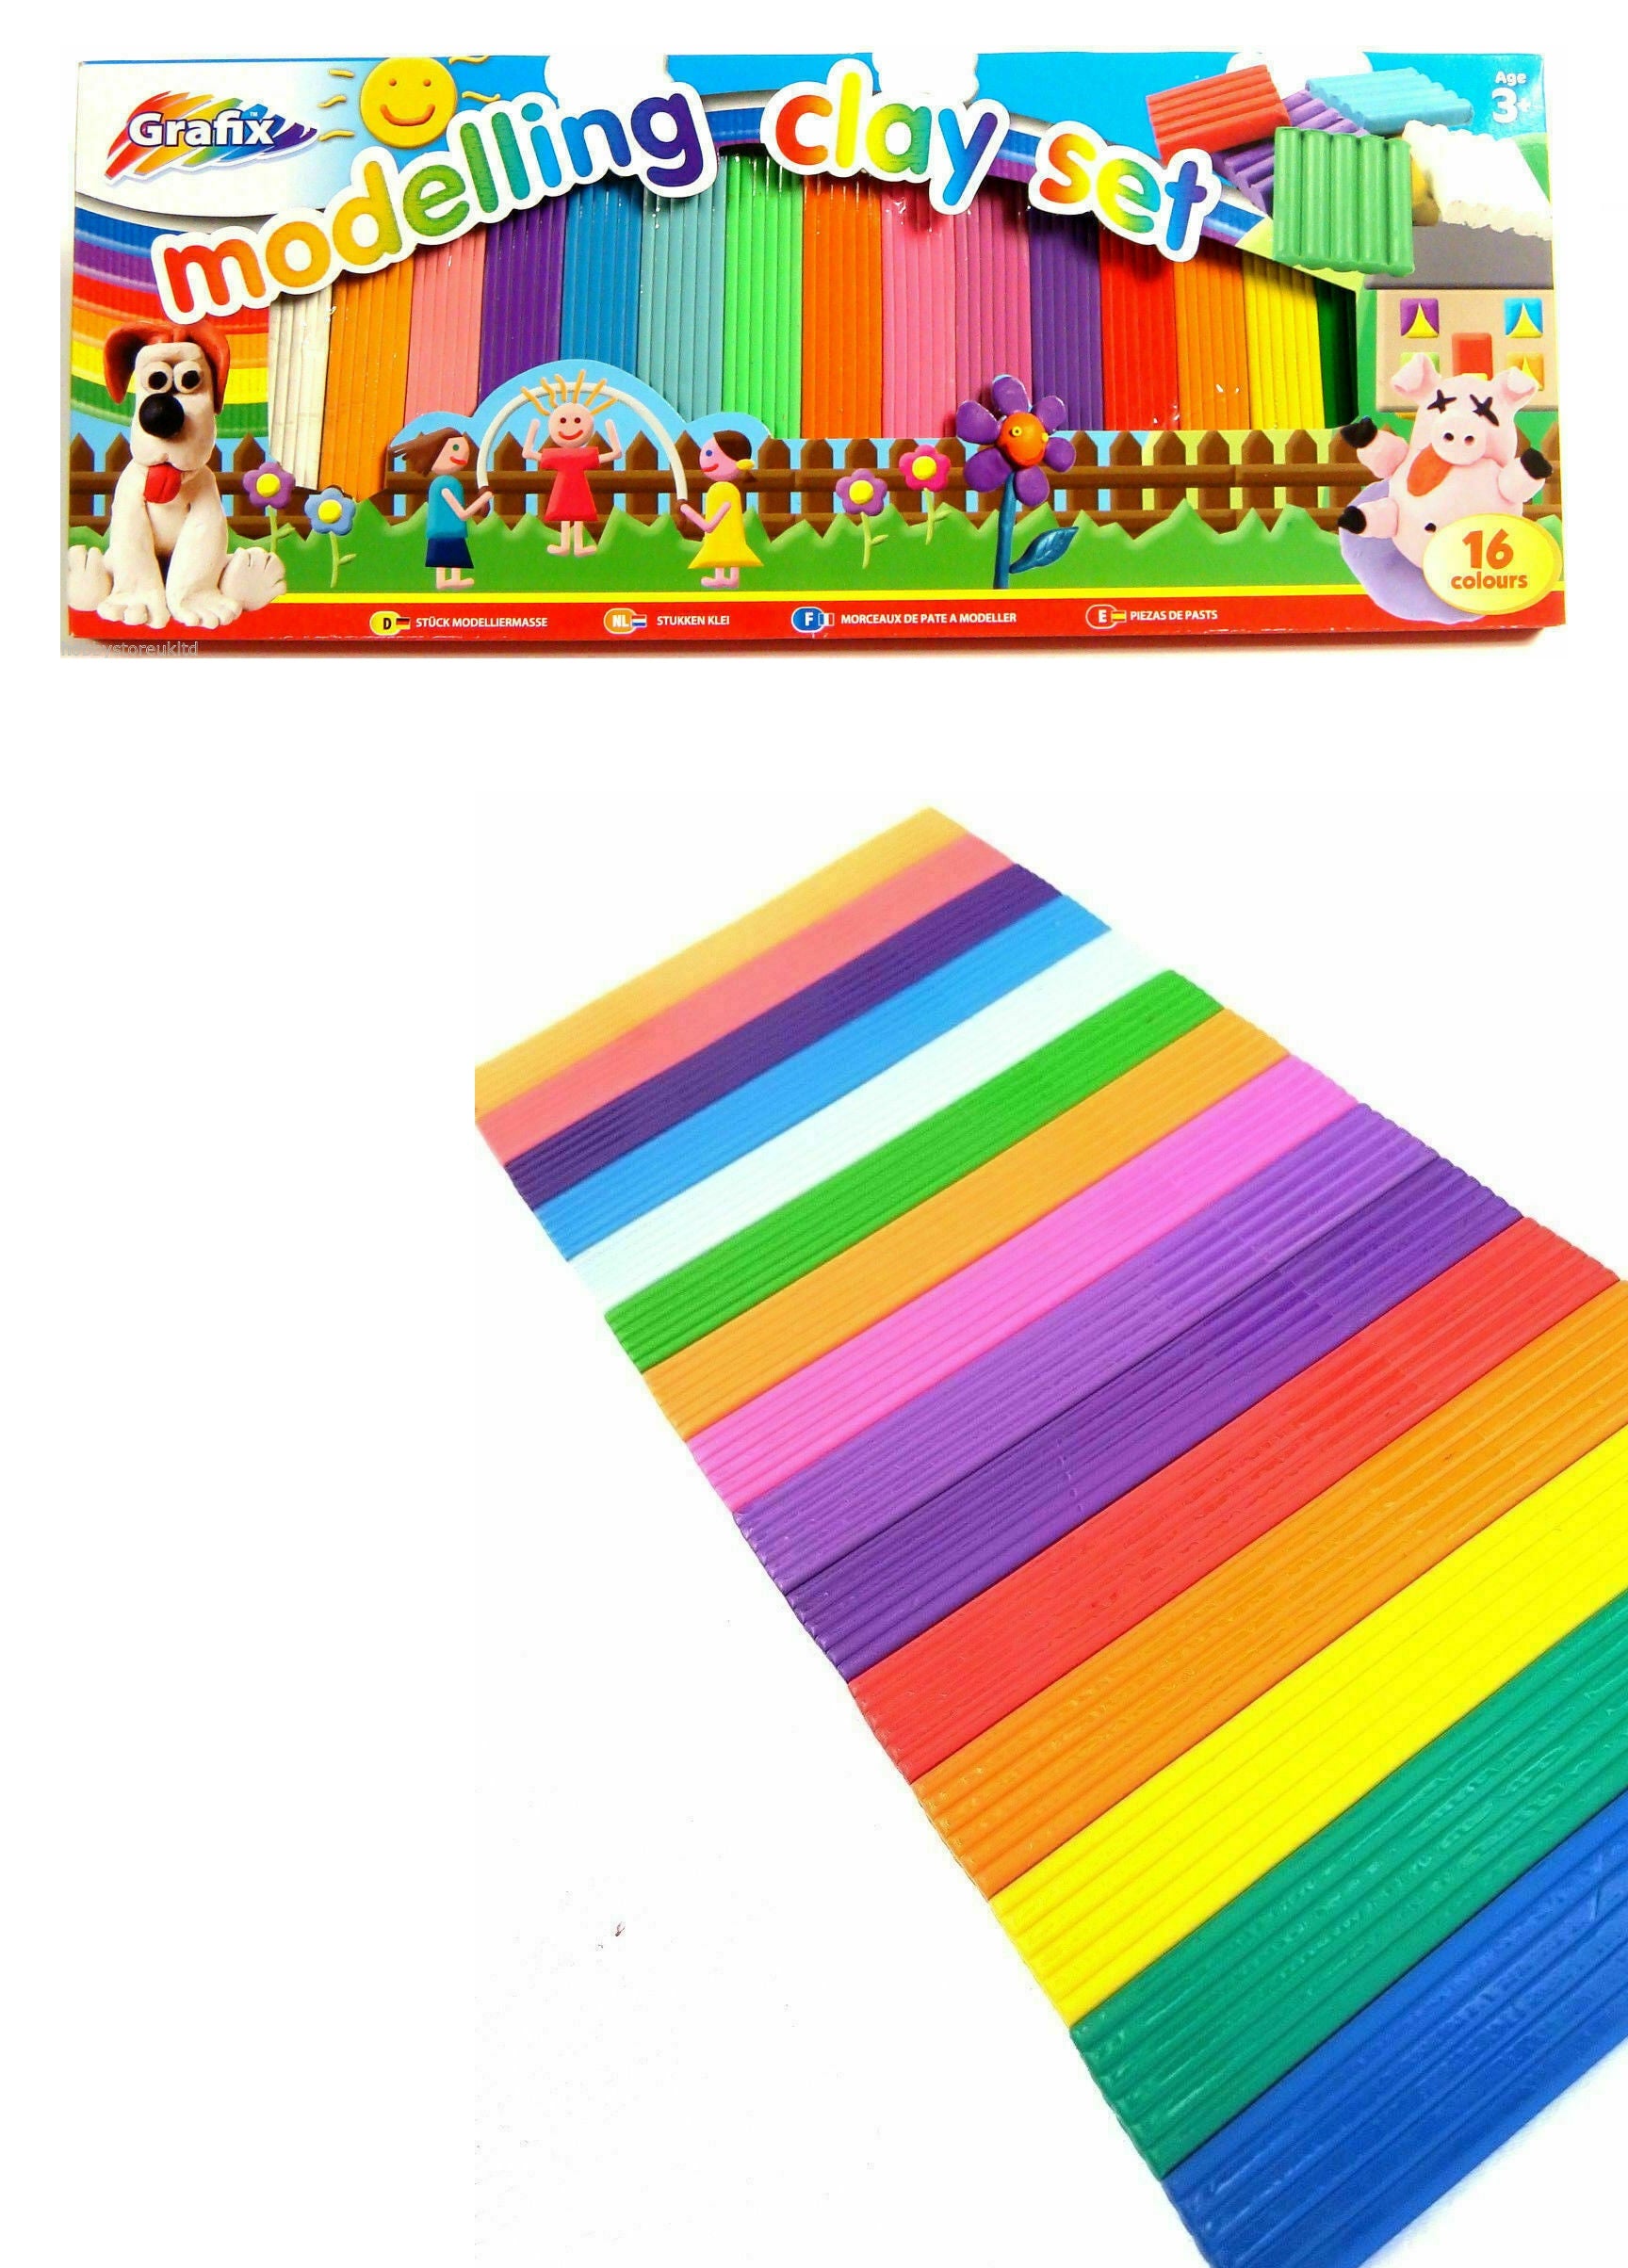 Beclen Harp Modelling Clay Set Plastercine 16 different Colours Kids Clay Craft Set Play Doh Party